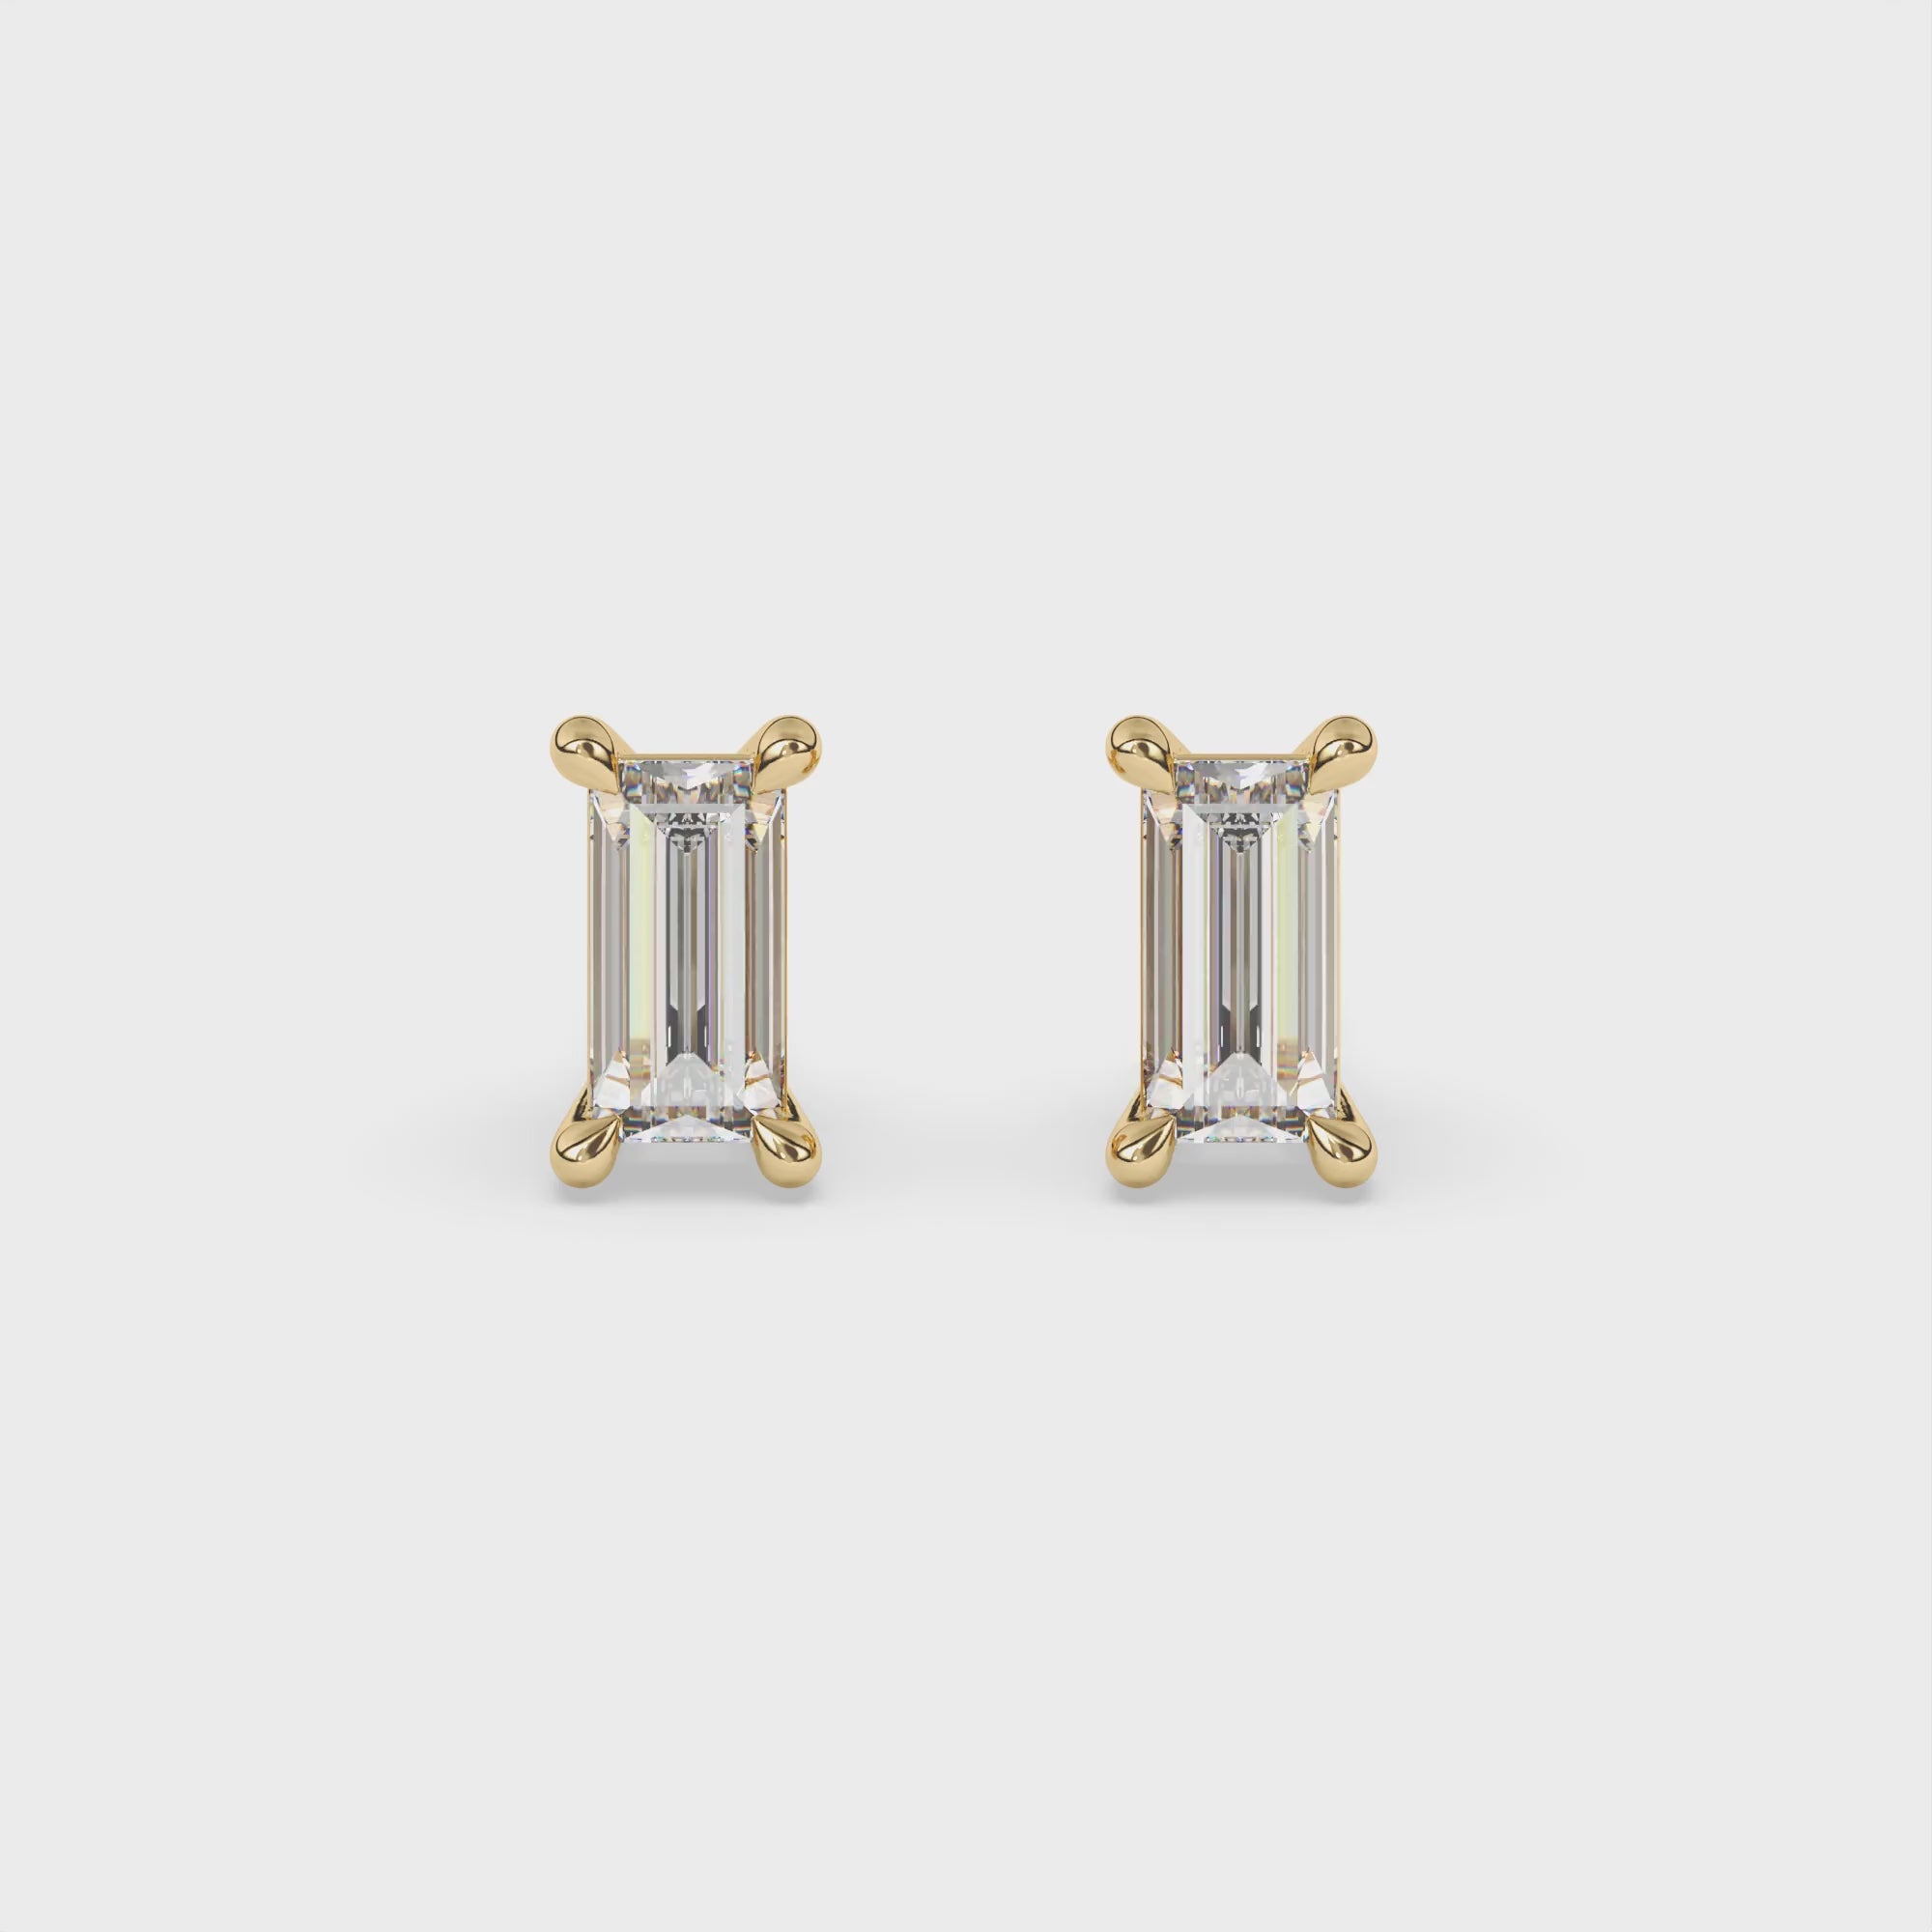 Enchanted Square Gold and Diamond Stud Earrings